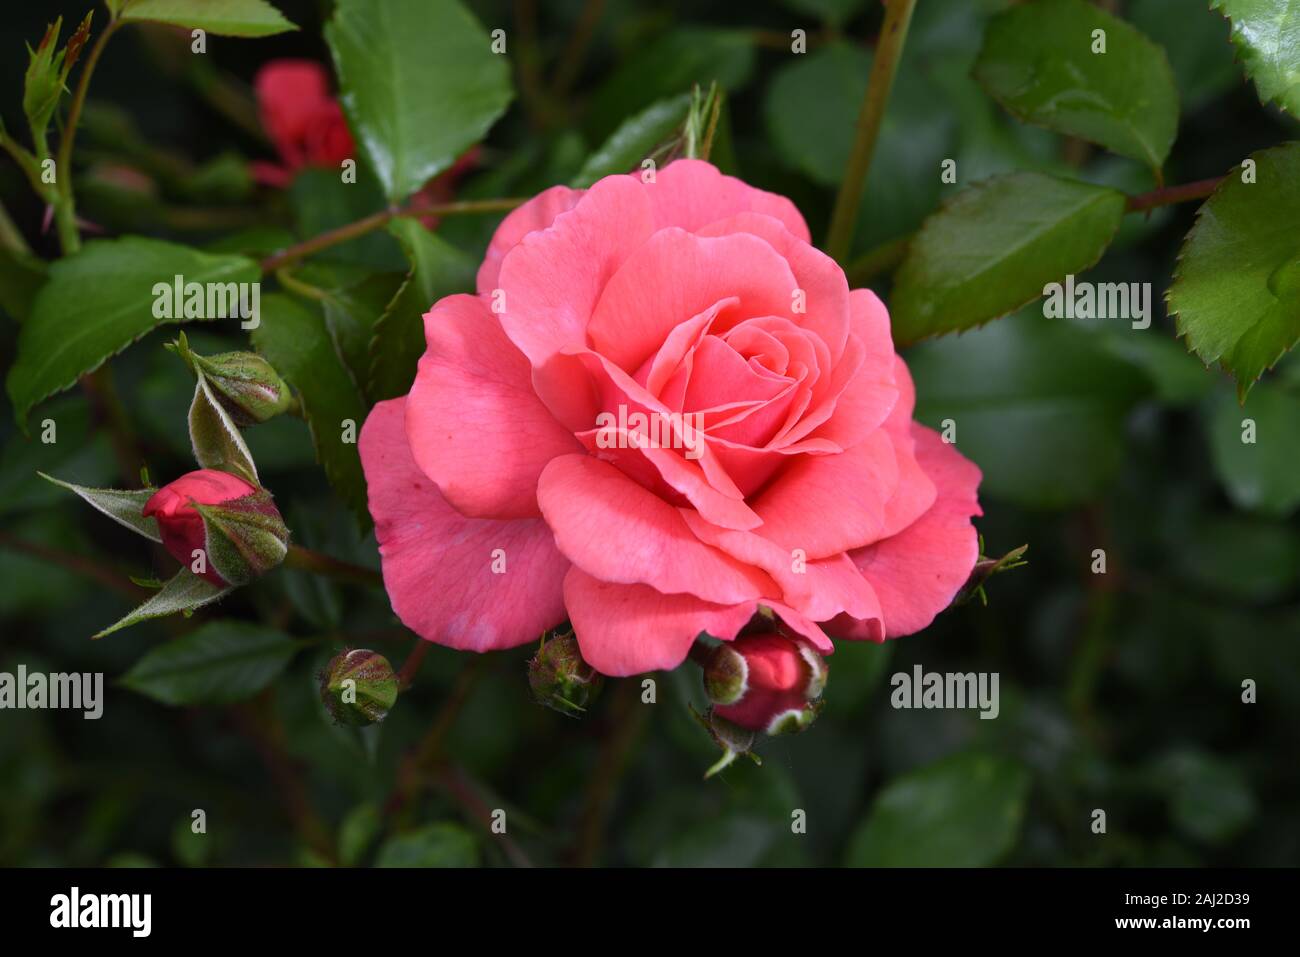 Beautiful flower head of Kordes pink rose Bad Birnbach with buds in a garden with dark green background Stock Photo